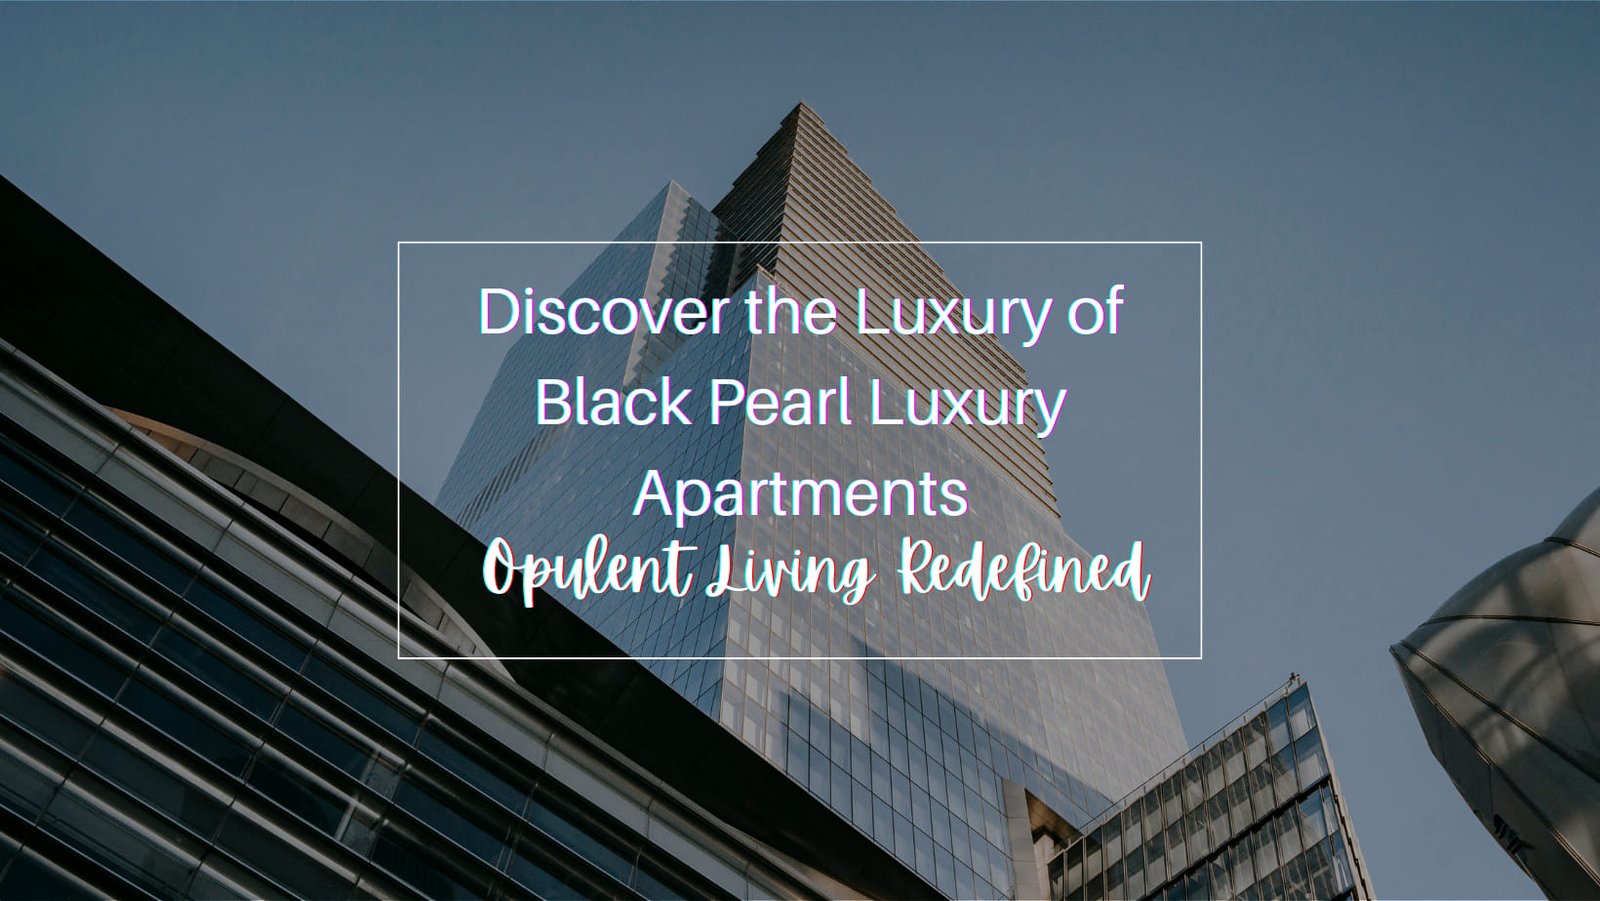 Discover the Luxury of Black Pearl Luxury Apartments: Opulent Living Redefined